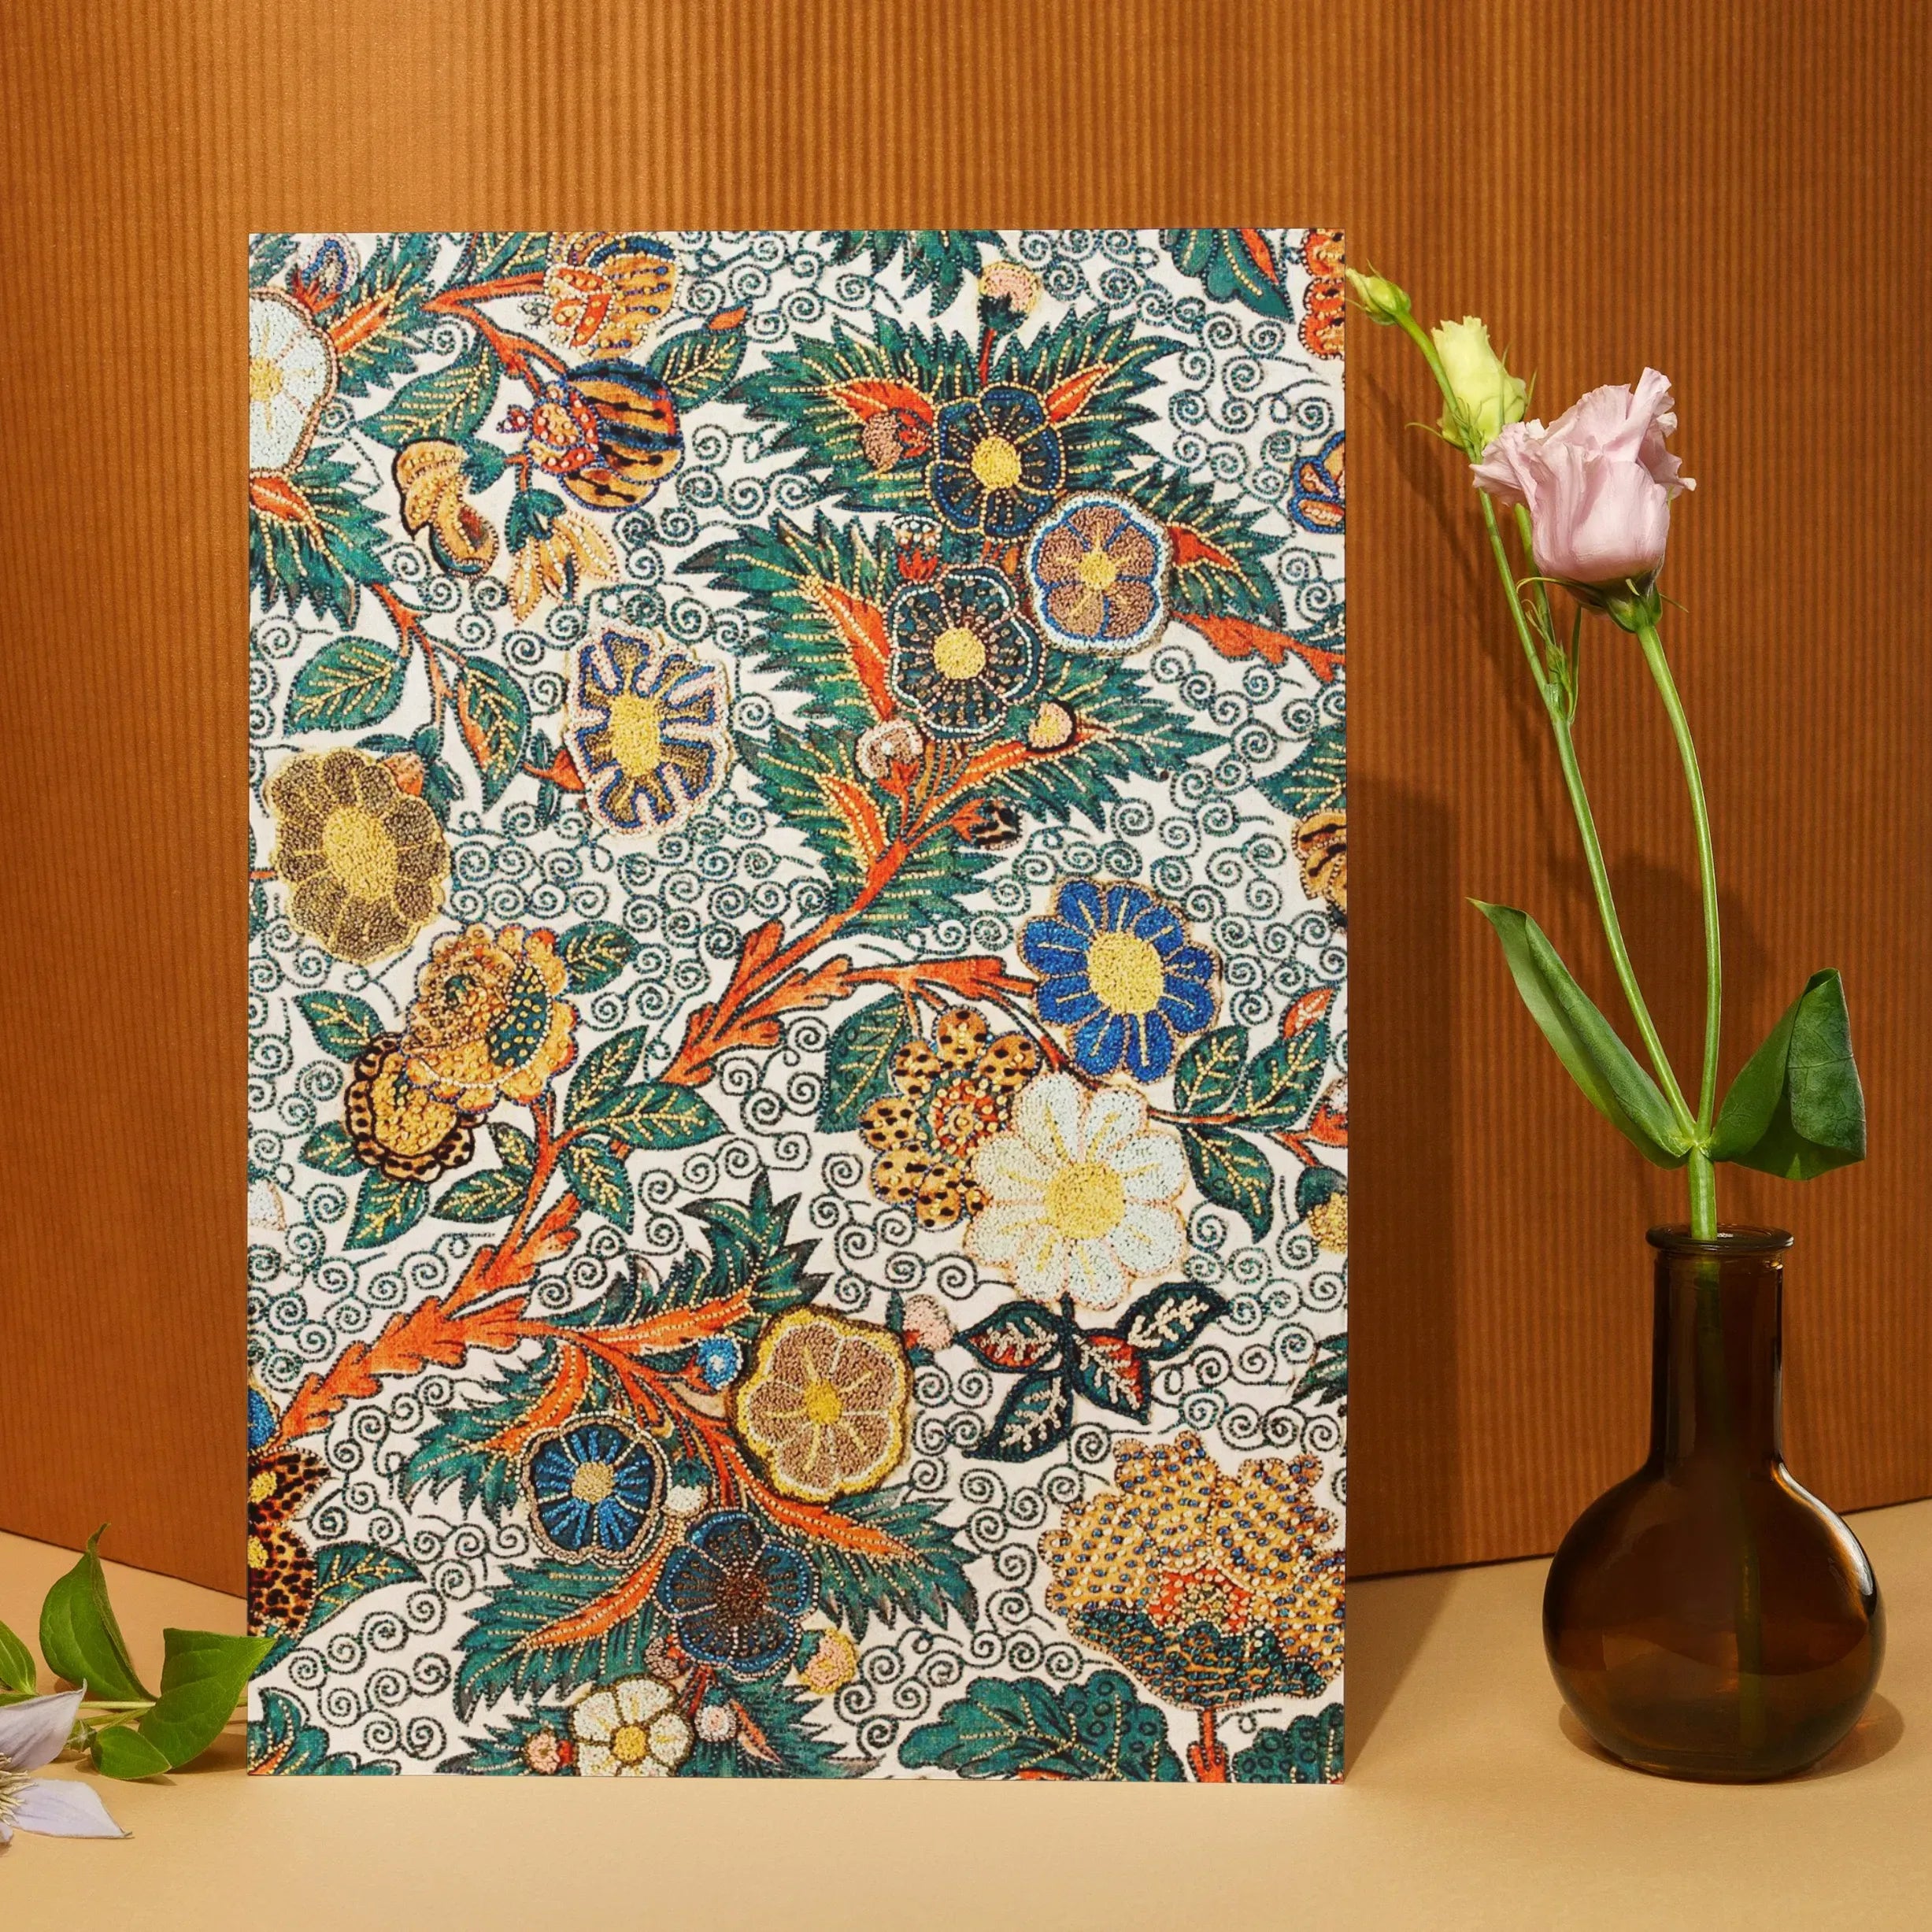 Blossomewhere Japanese Tapestry Art Greeting Card - A5 Portrait / 1 Card - Greeting & Note Cards - Aesthetic Art